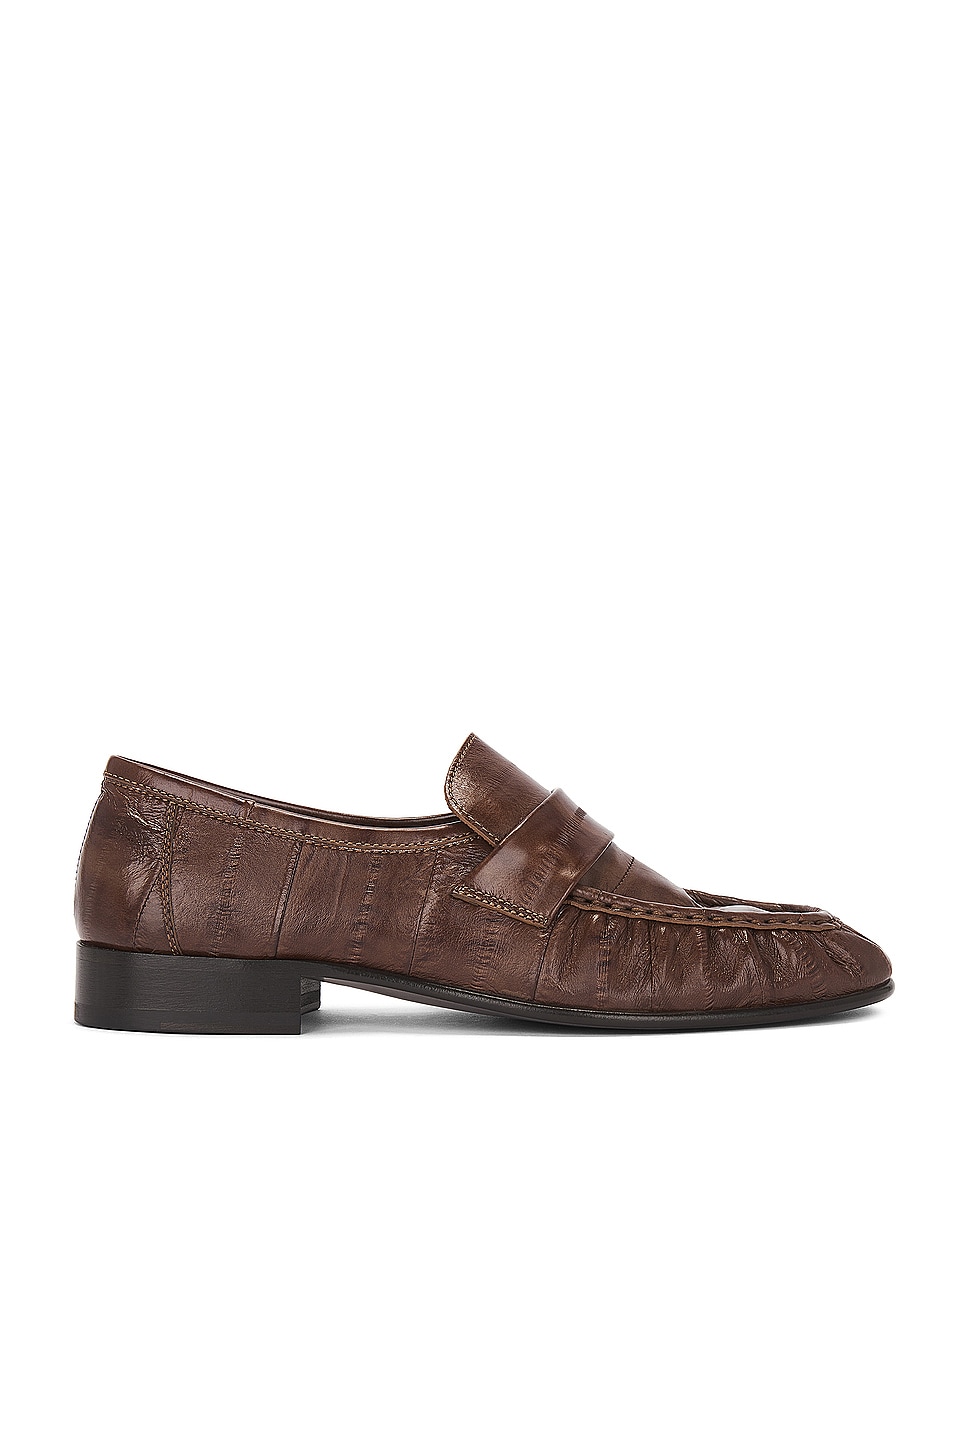 Image 1 of The Row Soft Loafer in LIGHT BROWN